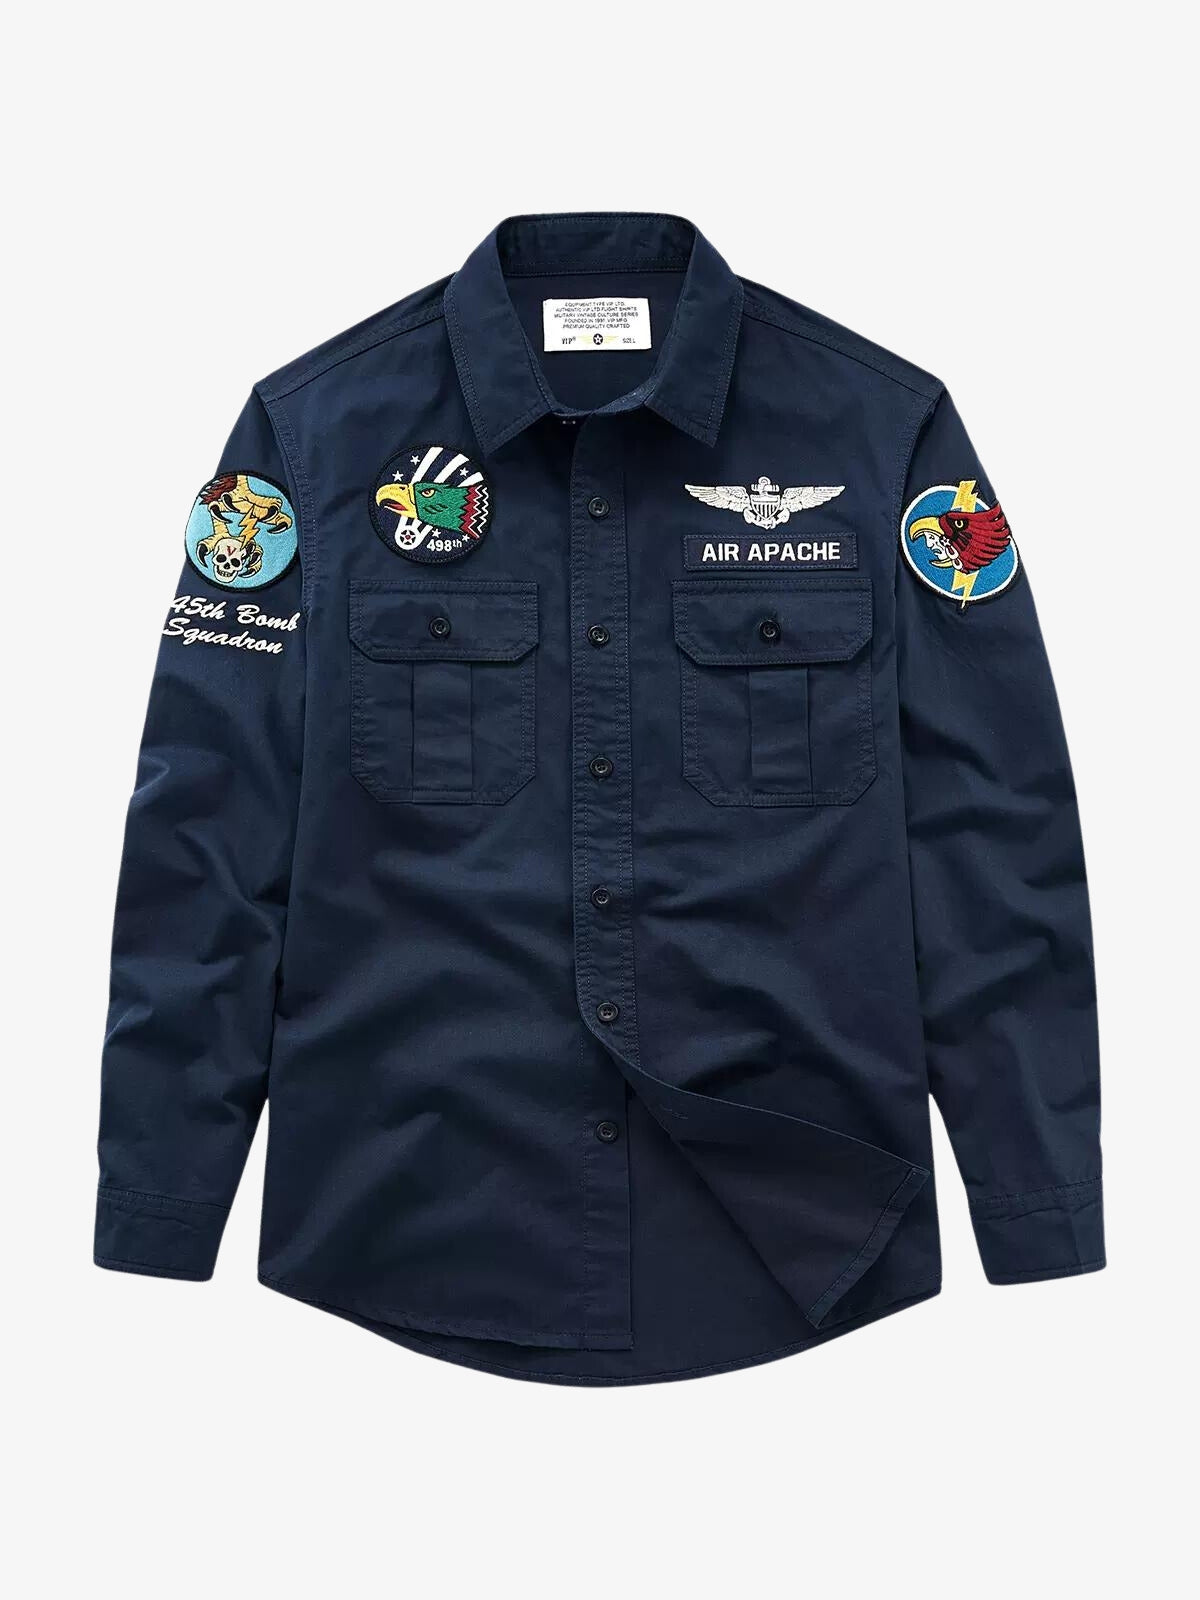 Tactical Embroidered Retro Jacket